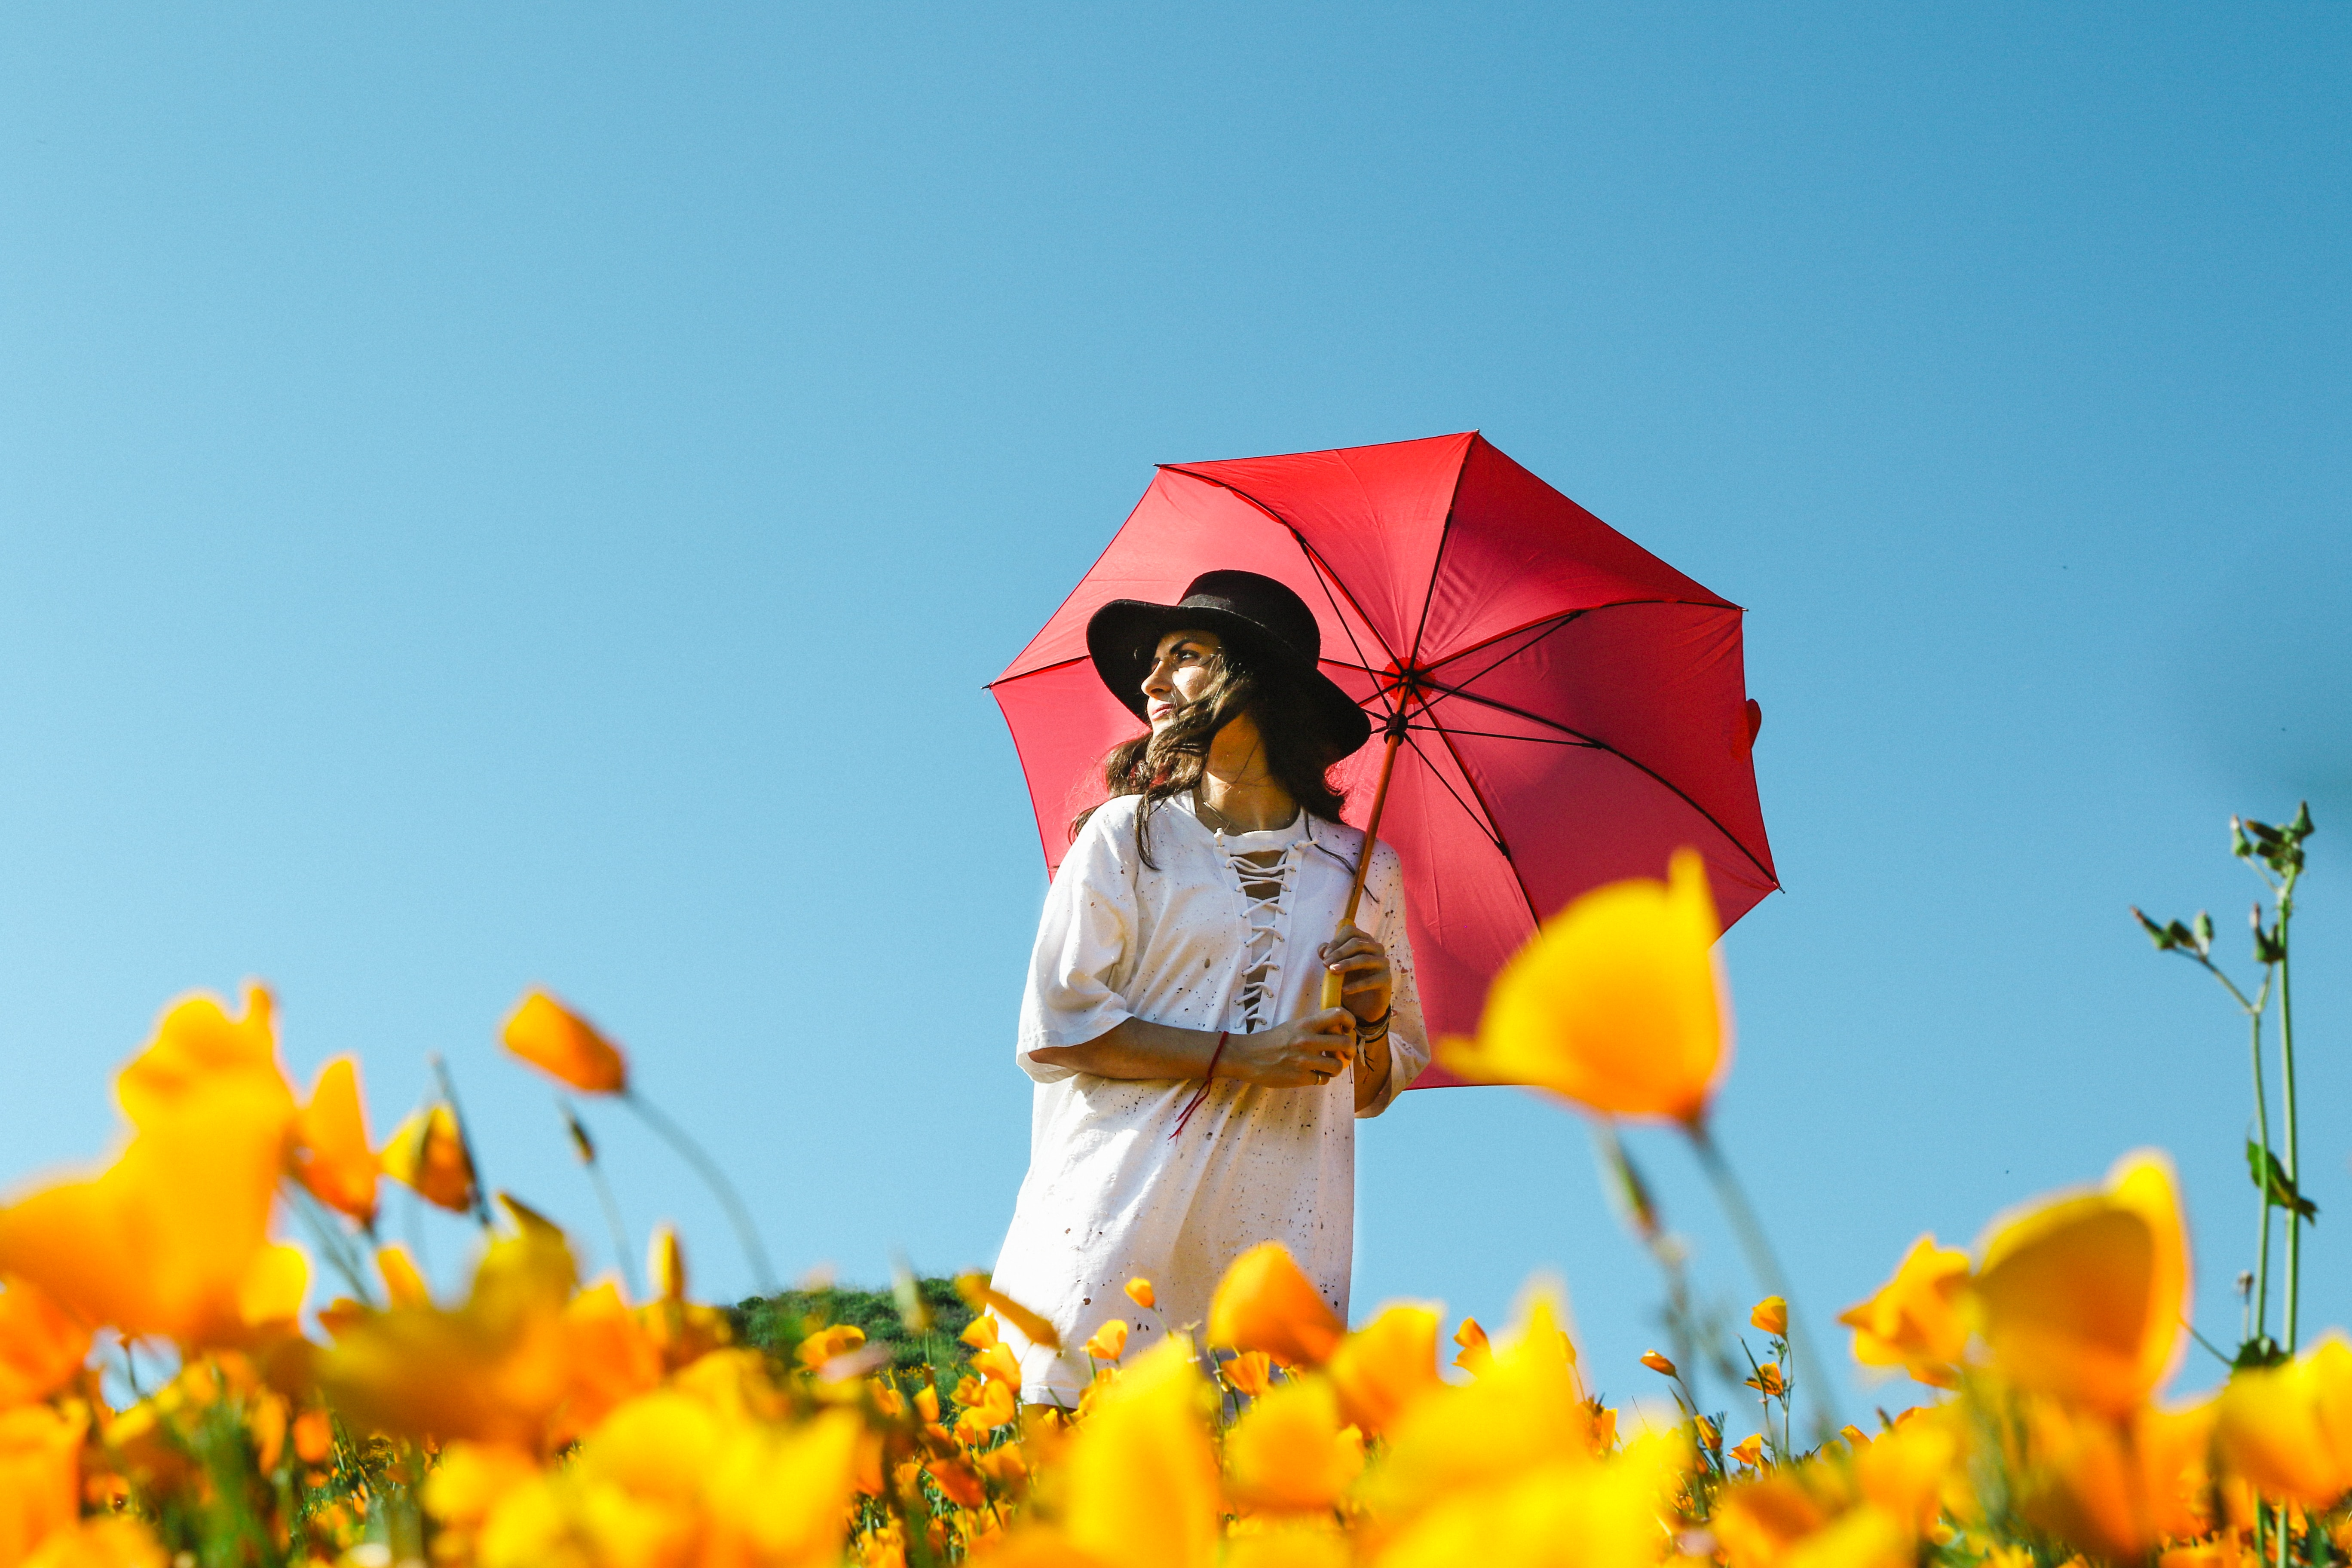 woman-standing-in-yellow-flower-field-black-hat-red-umbrella-blue-sky-background